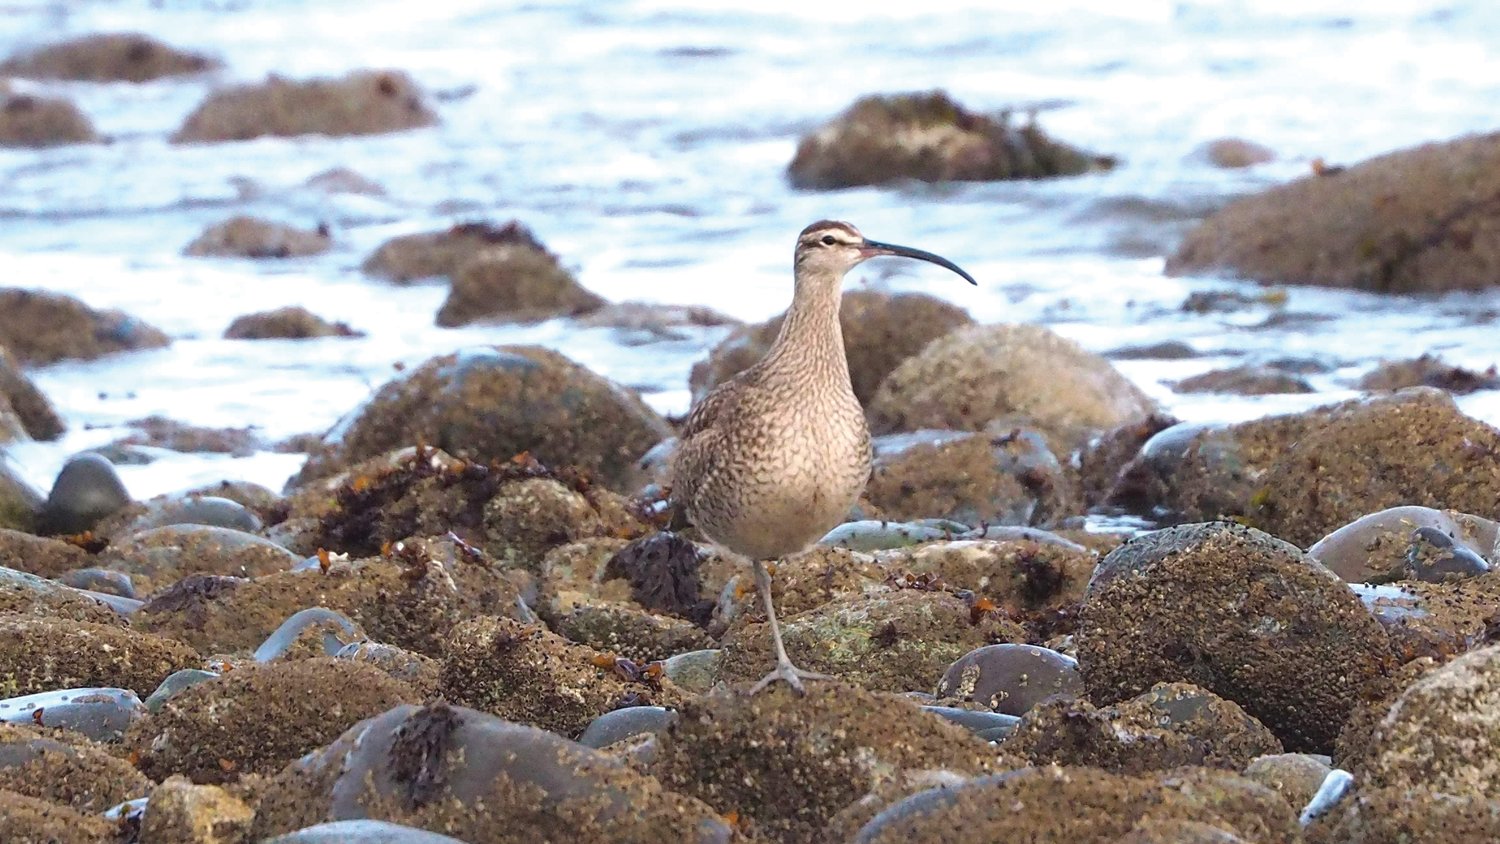 The Whimbrel is a large shorebird with a long, downcurved beak.